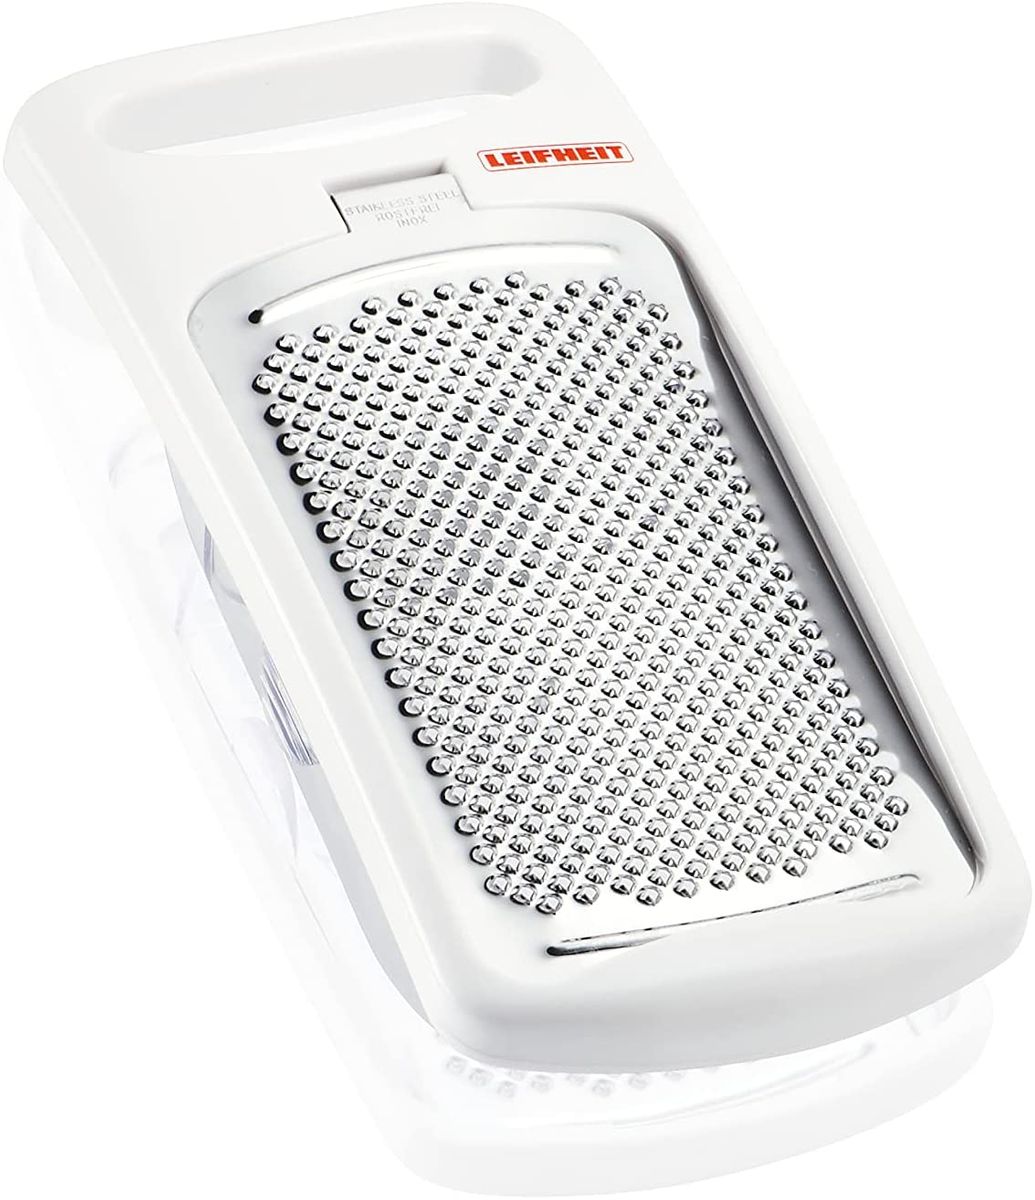 Leifheit nutmeg grater ComfortLine series with extra hardened stainless steel blades, stainless, dishwasher safe, also suitable for Parmesan, nutmeg grater with collection container, ginger grater, rasp, slicer Comfort Line